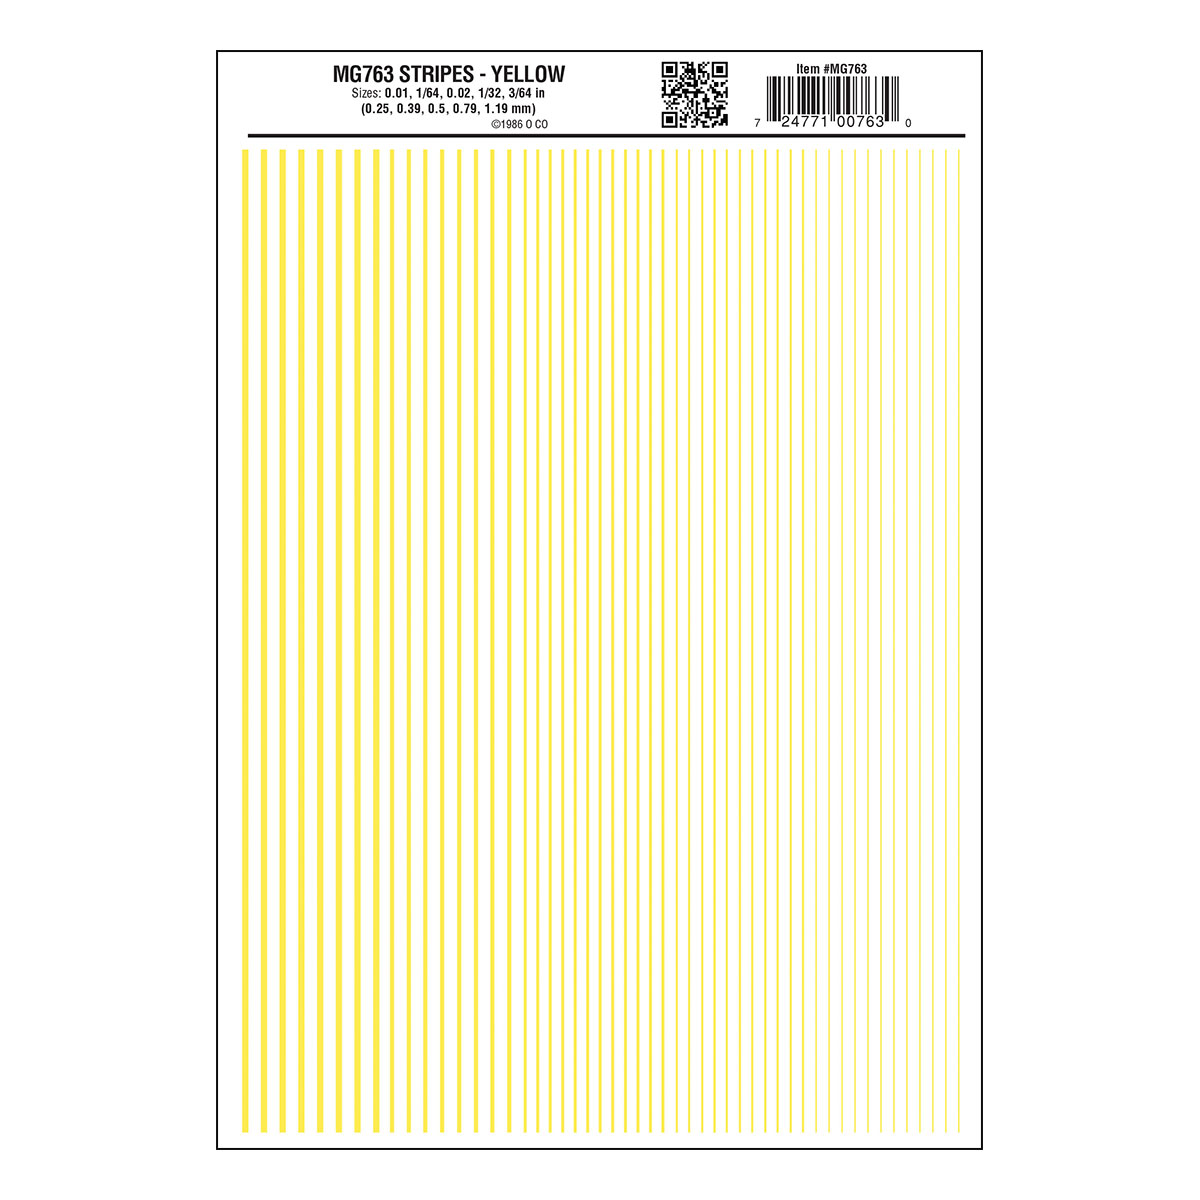 Stripes Yellow - Package contains one sheet: 5 5/8" x 8 1/4" (14